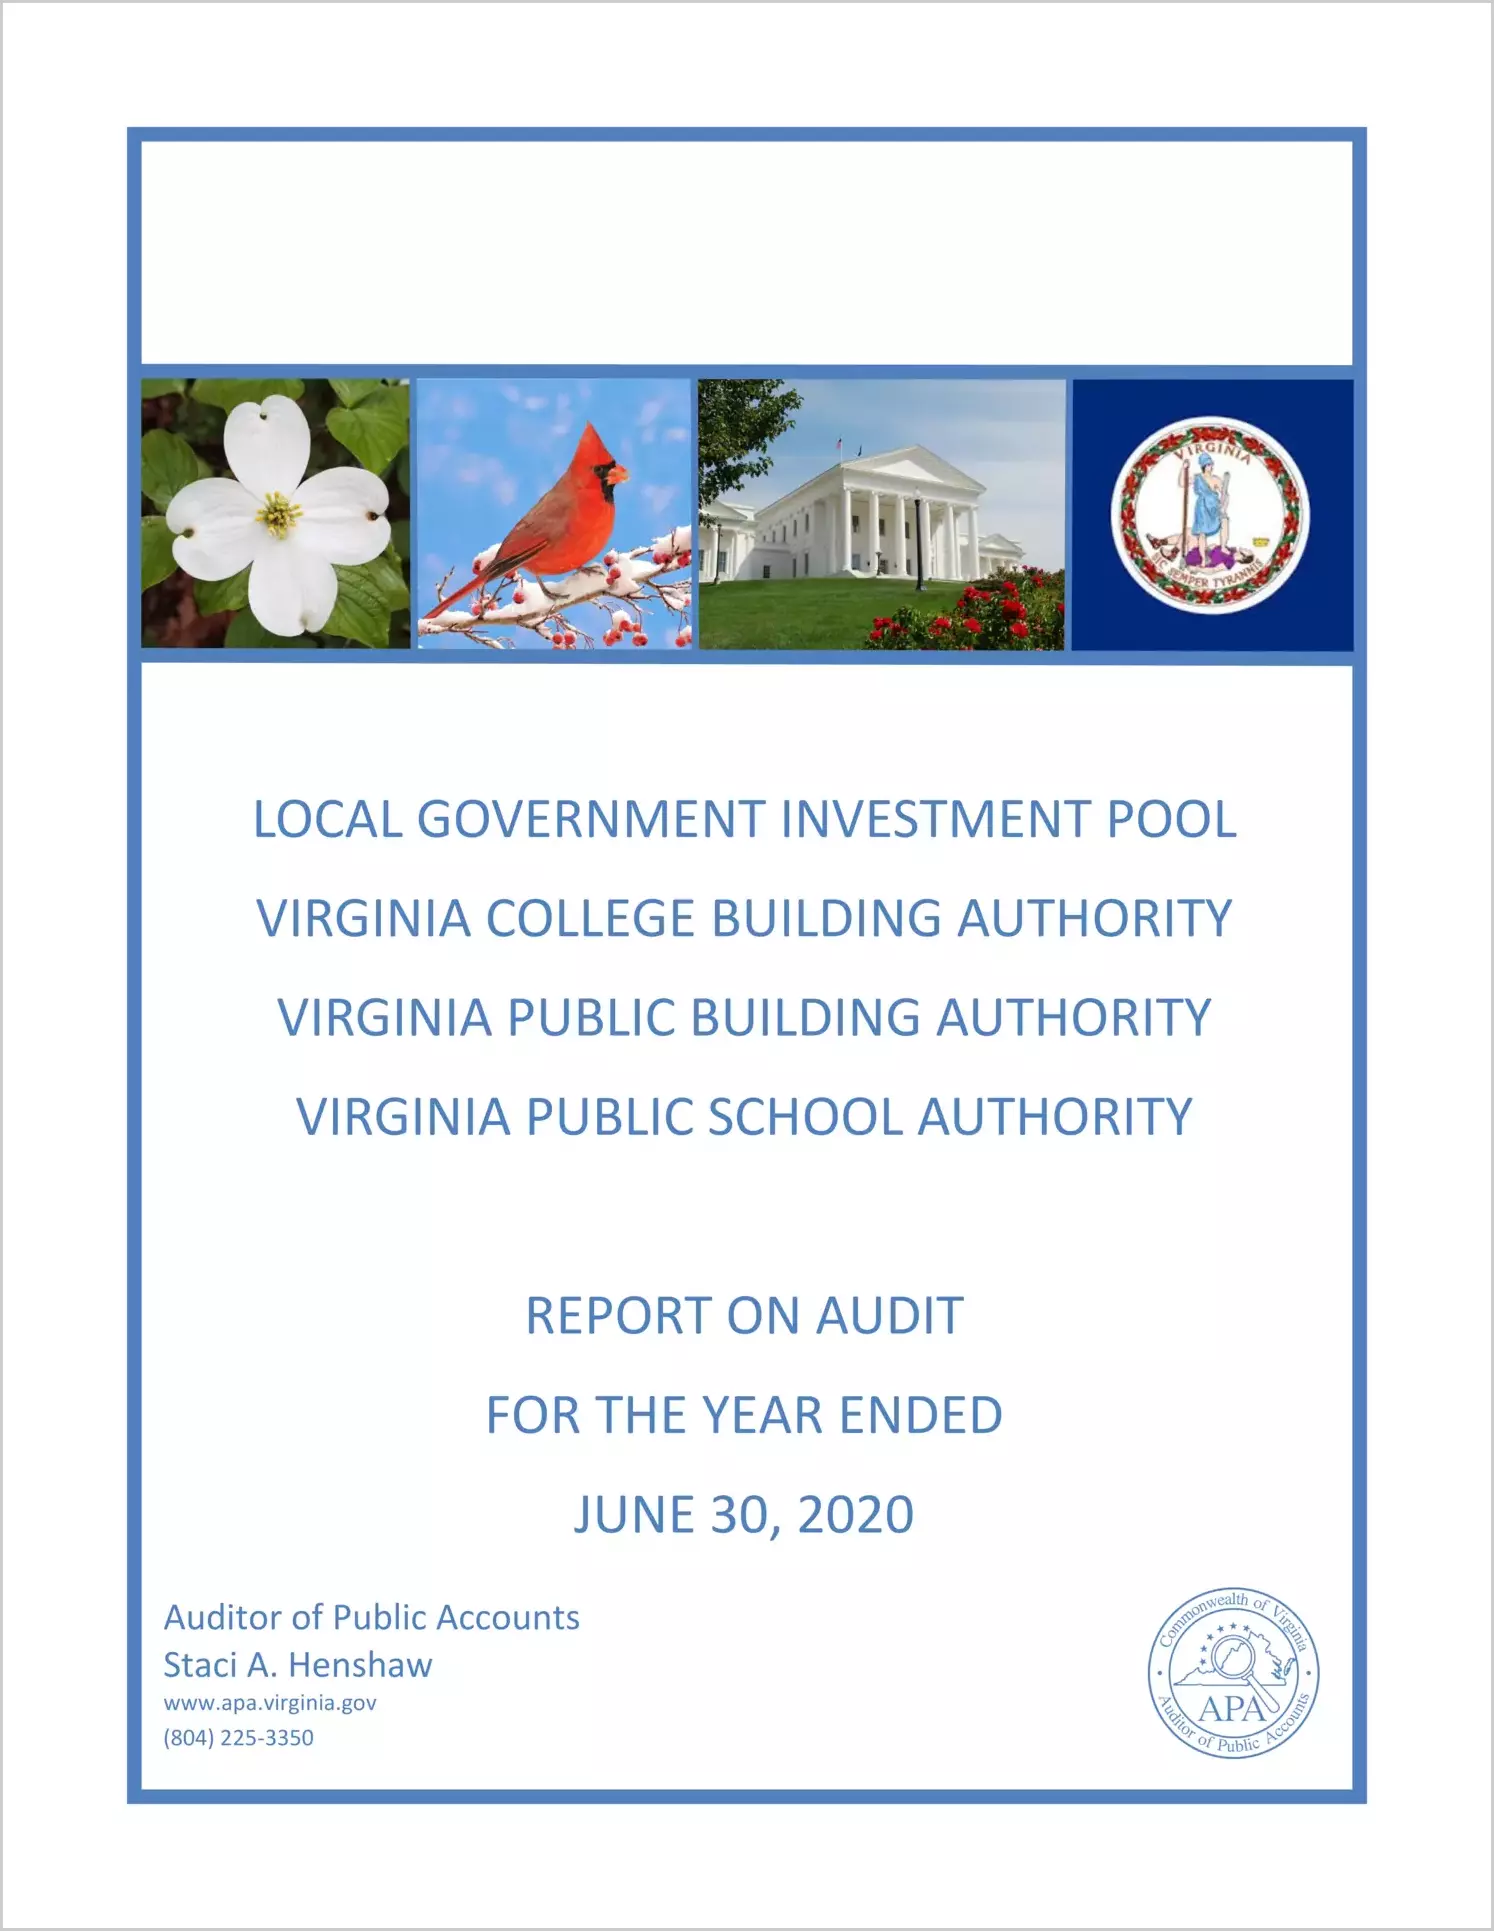 Local Government Investment Pool, Virginia College Building Authority, Virginia Public Building Authority, Virginia Public School Authority for the year ended June 30, 2020